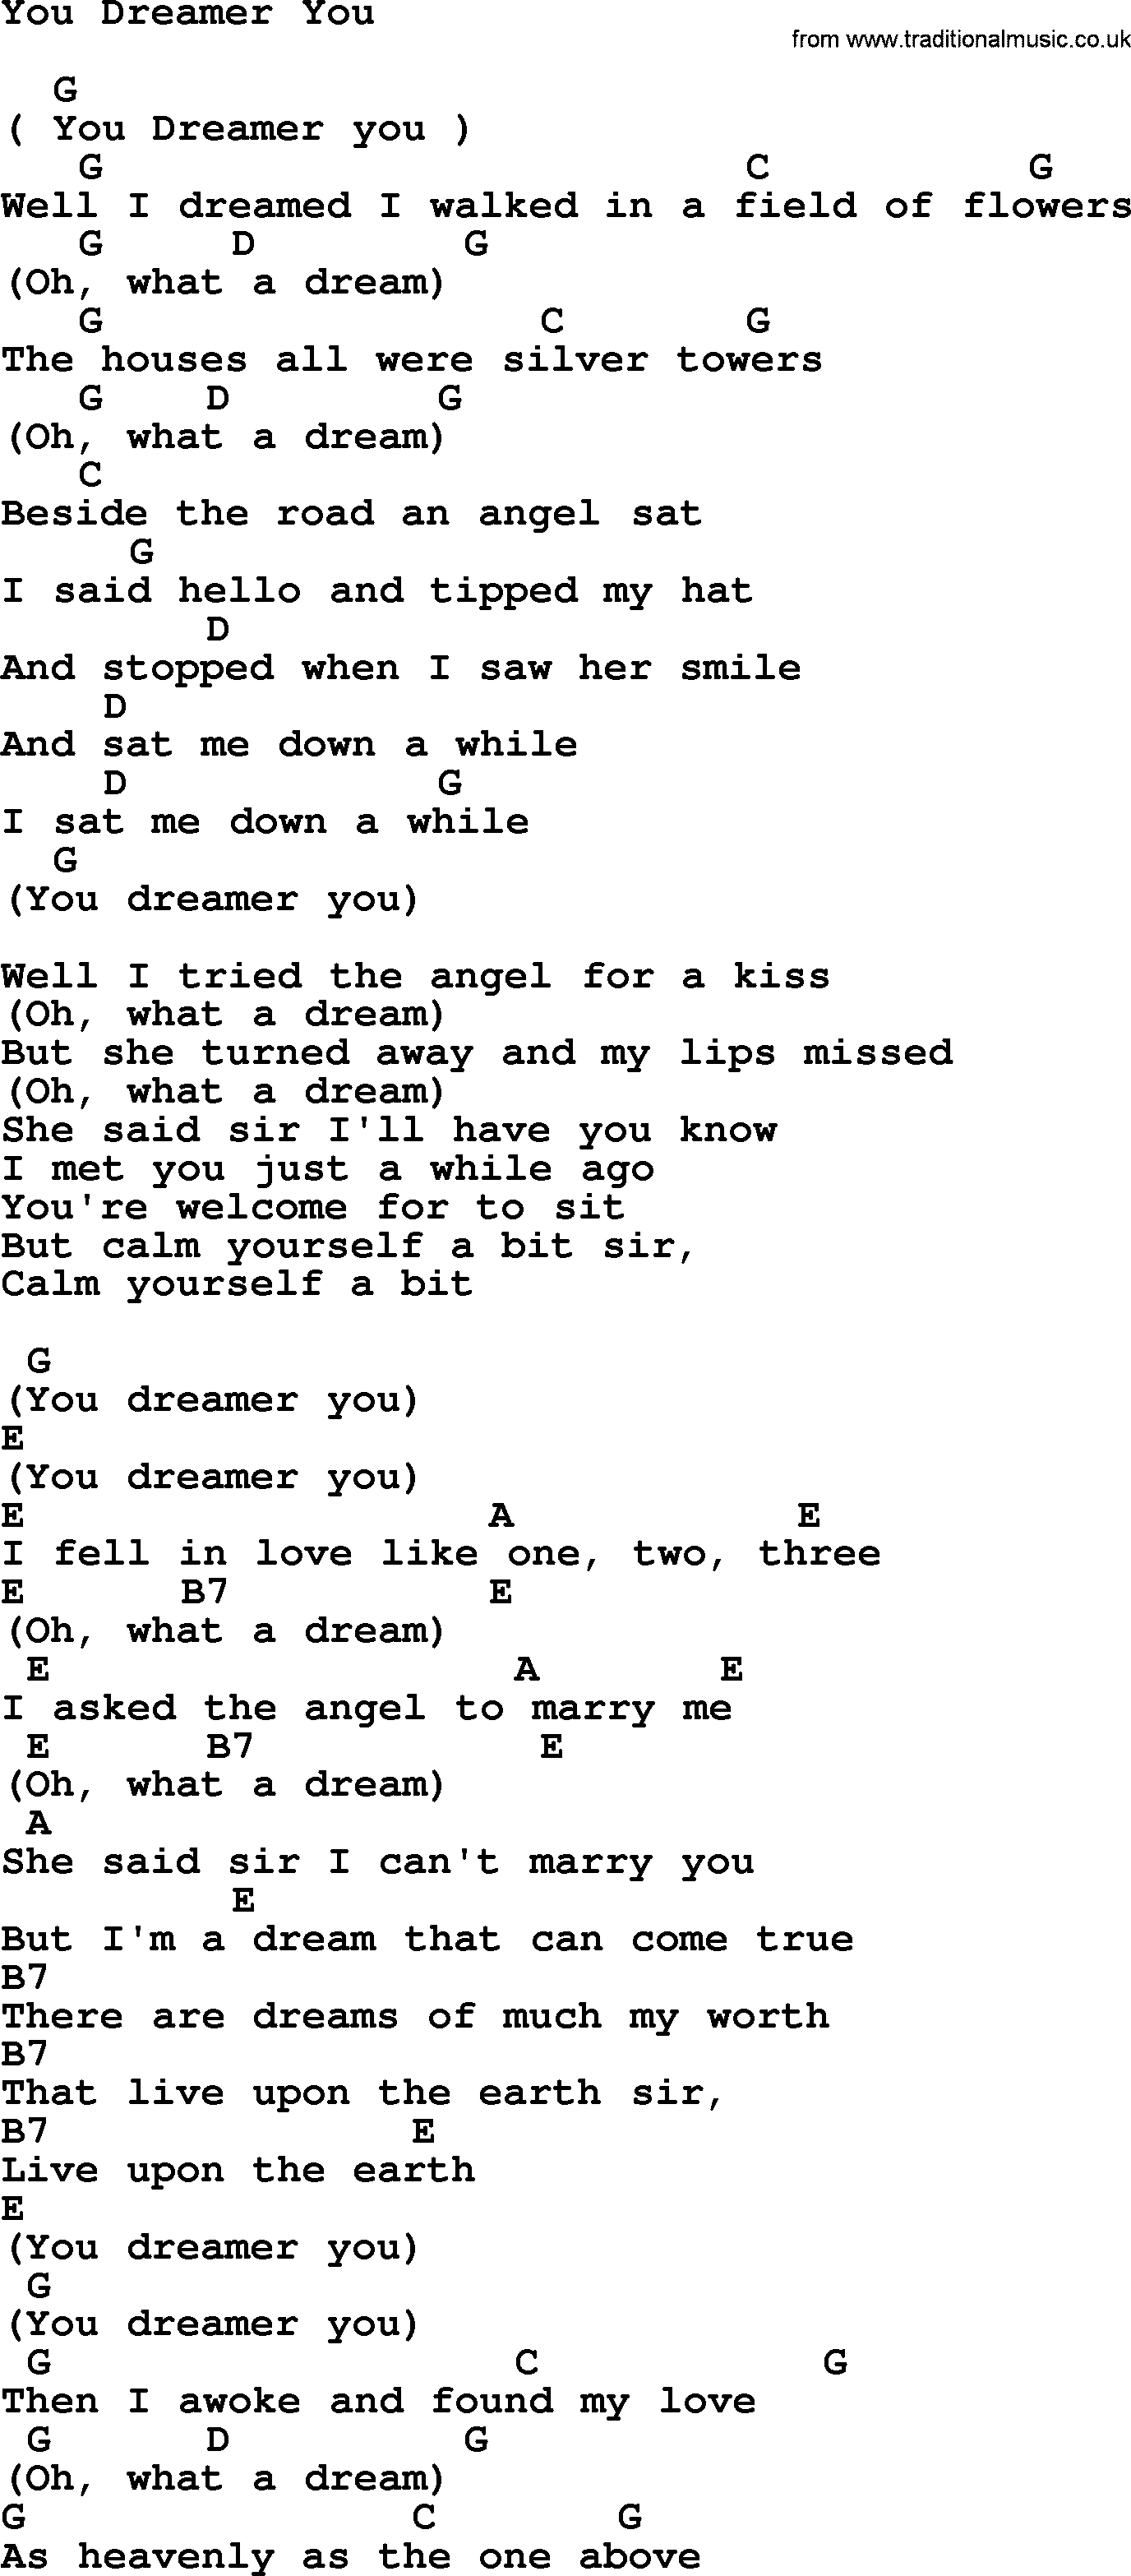 Johnny Cash song You Dreamer You, lyrics and chords